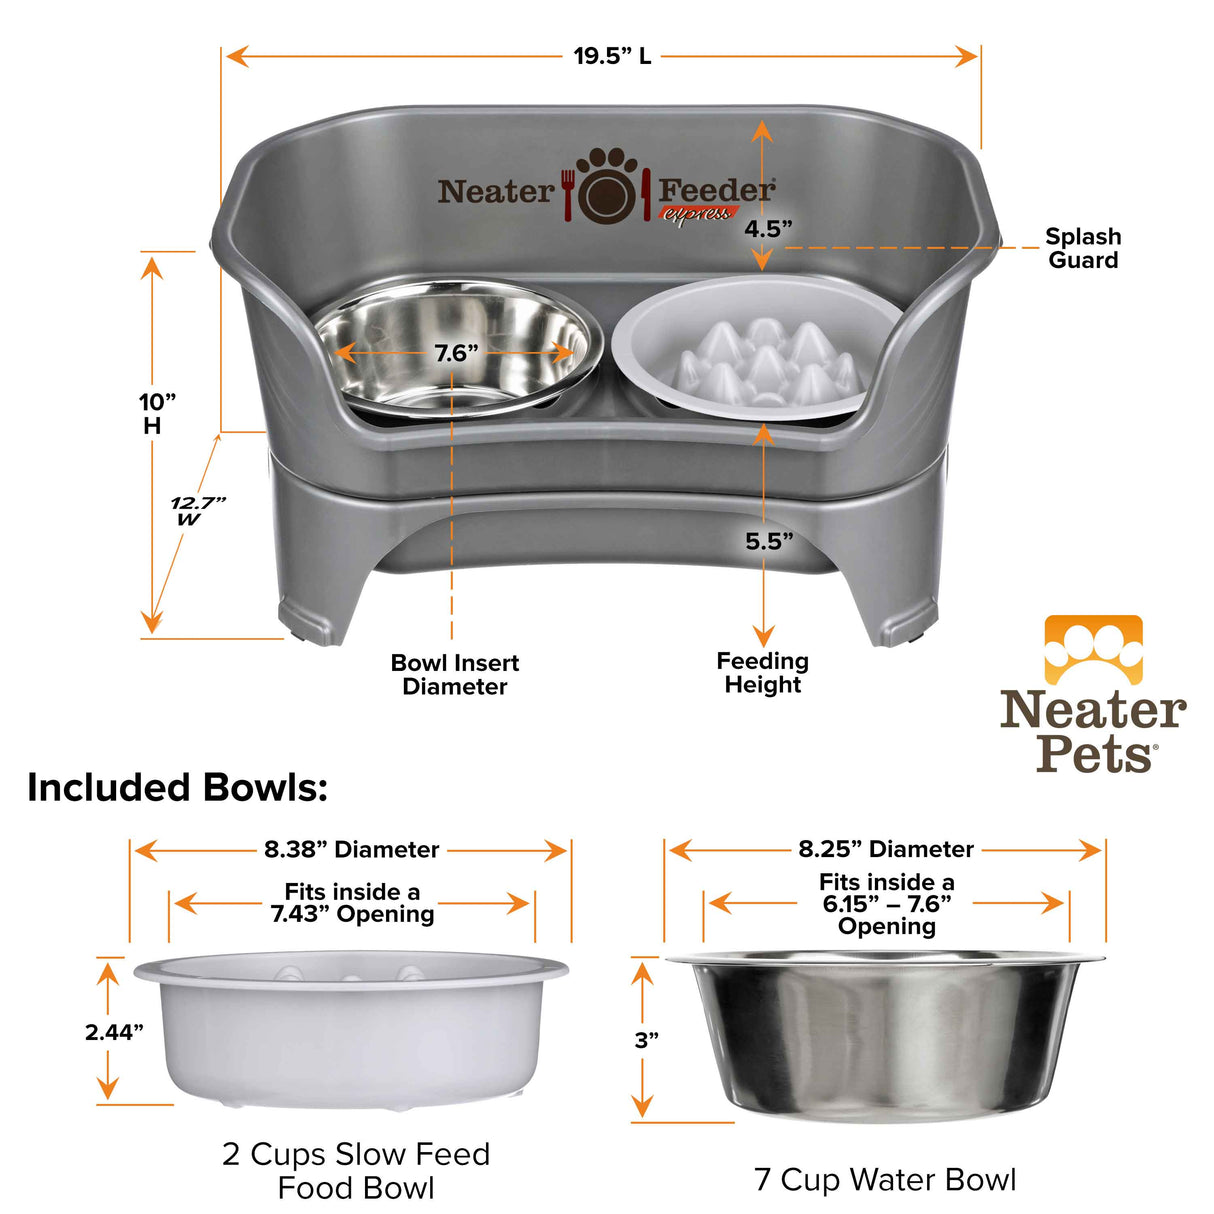 Dimensions of the Gunmetal gray medium to large EXPRESS Neater Feeder, The Niner Slow Feed Bowl, and the seven cup water bowl